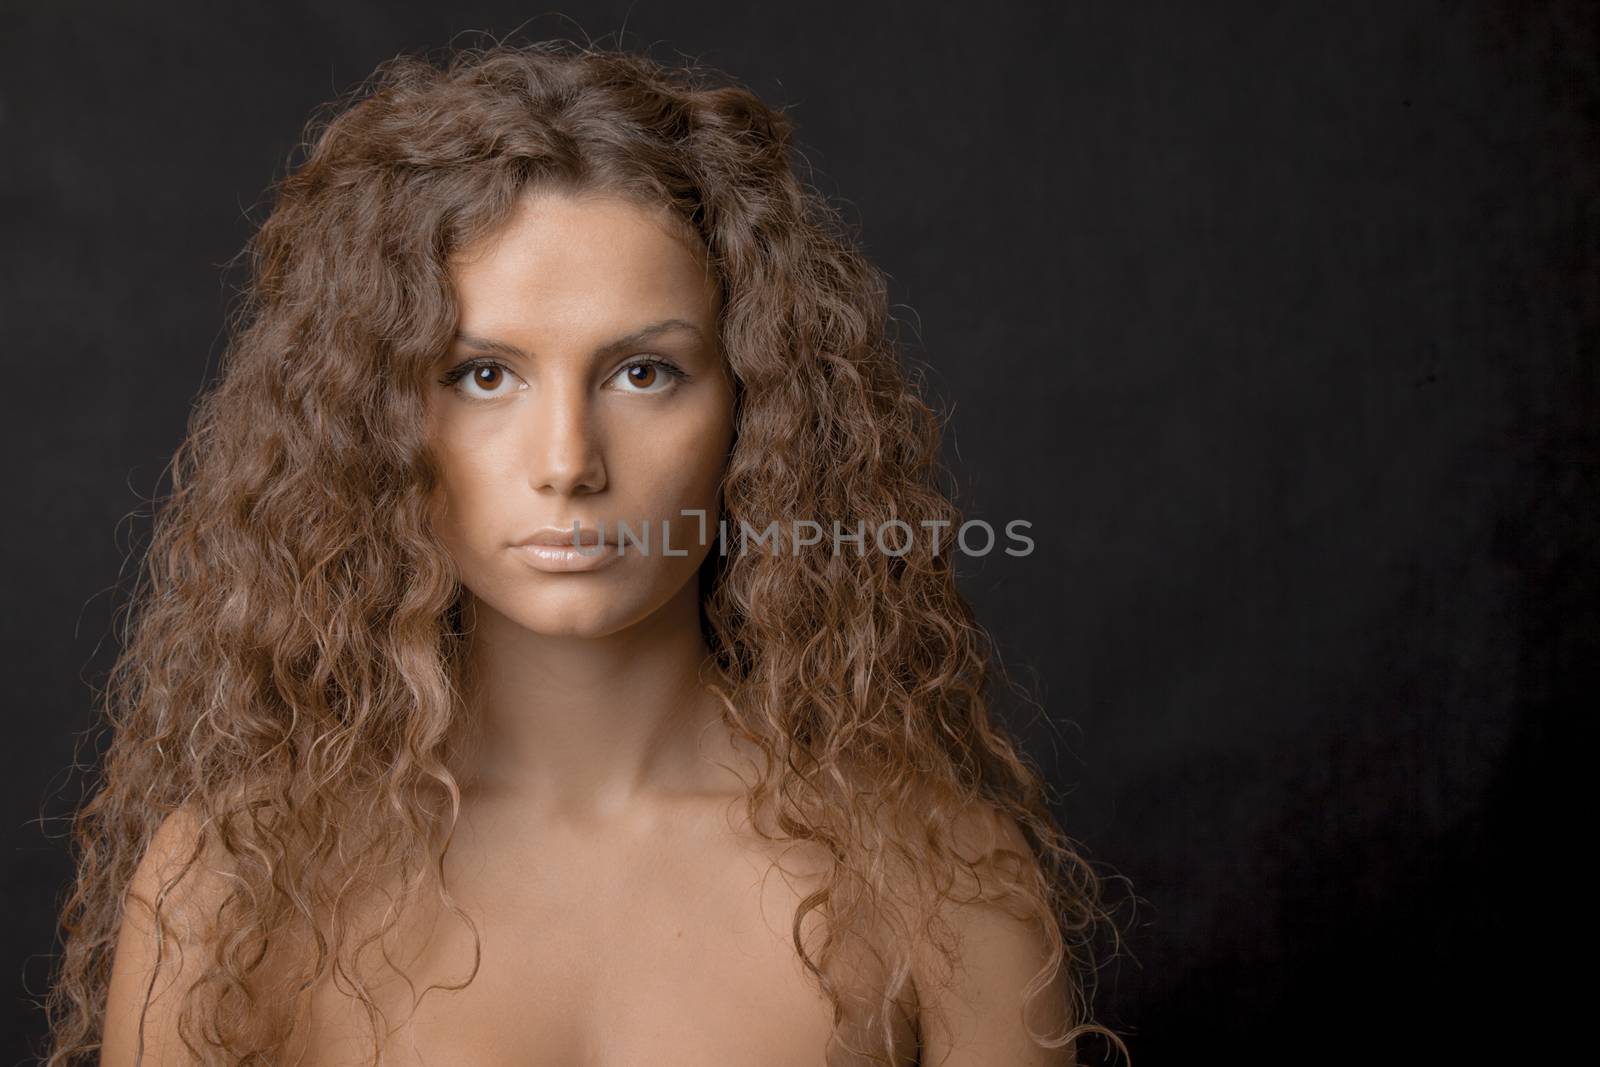 A beauty shot of a pretty young female with gorgeous curly long hair, low key.